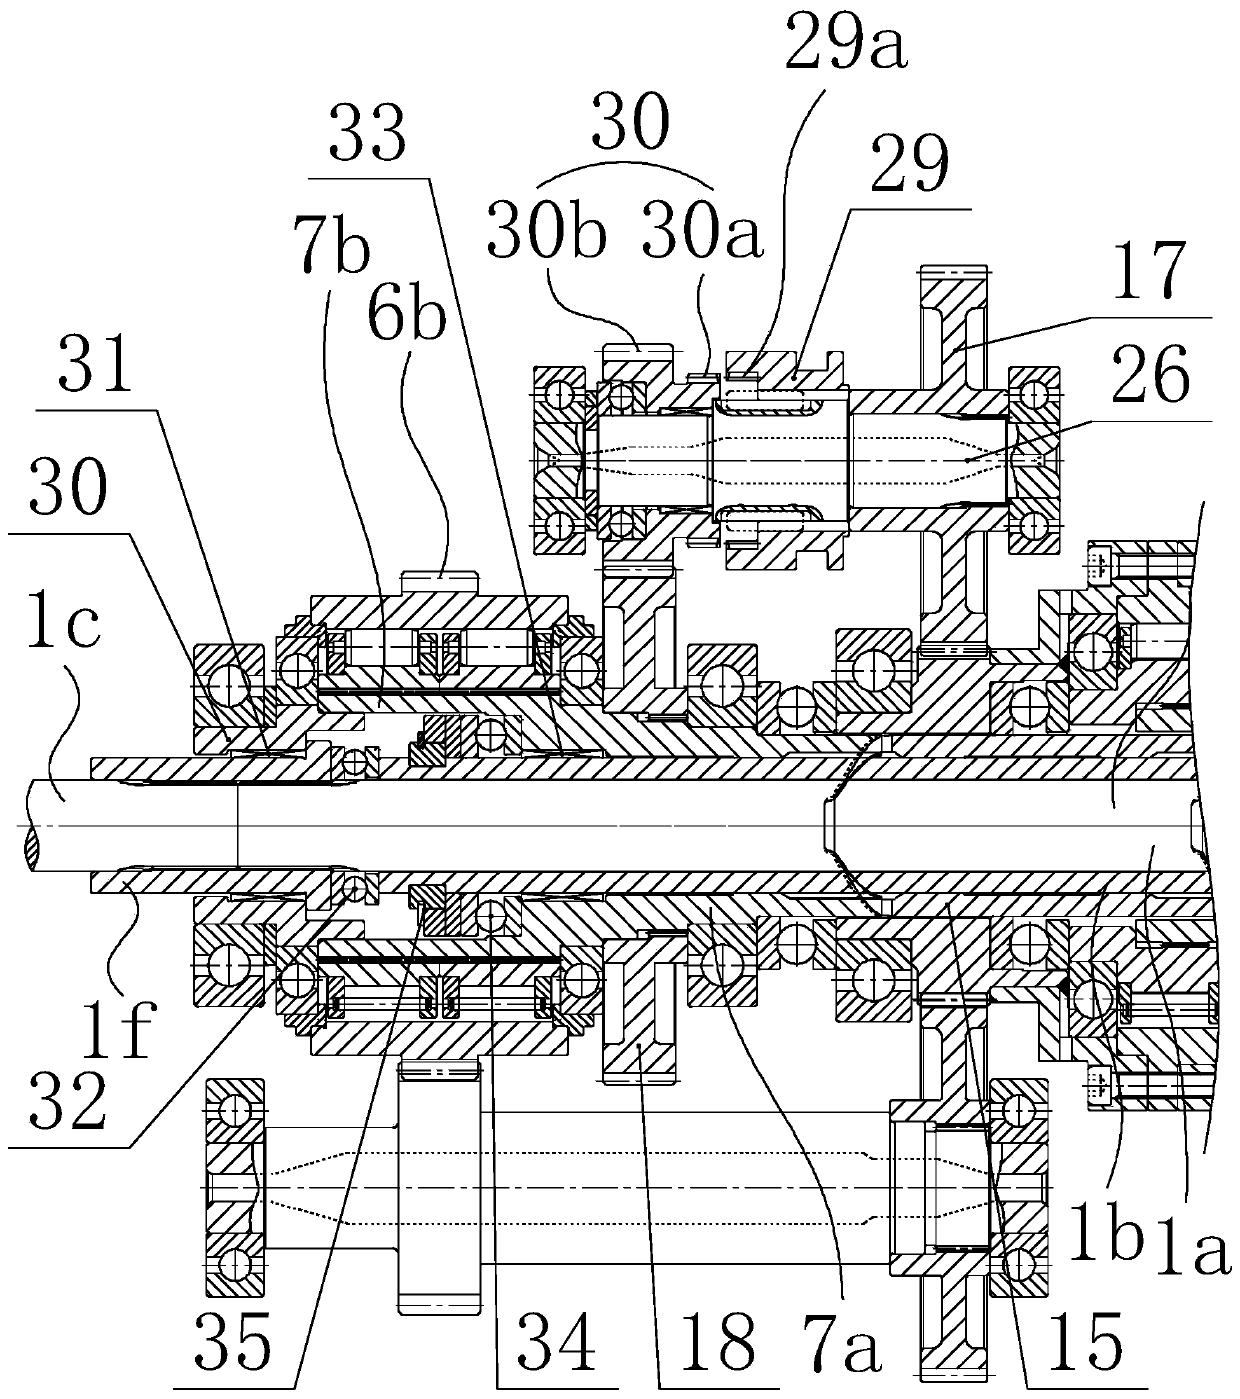 Large-load self-adaptive automatic speed change system capable of shifting gears easily